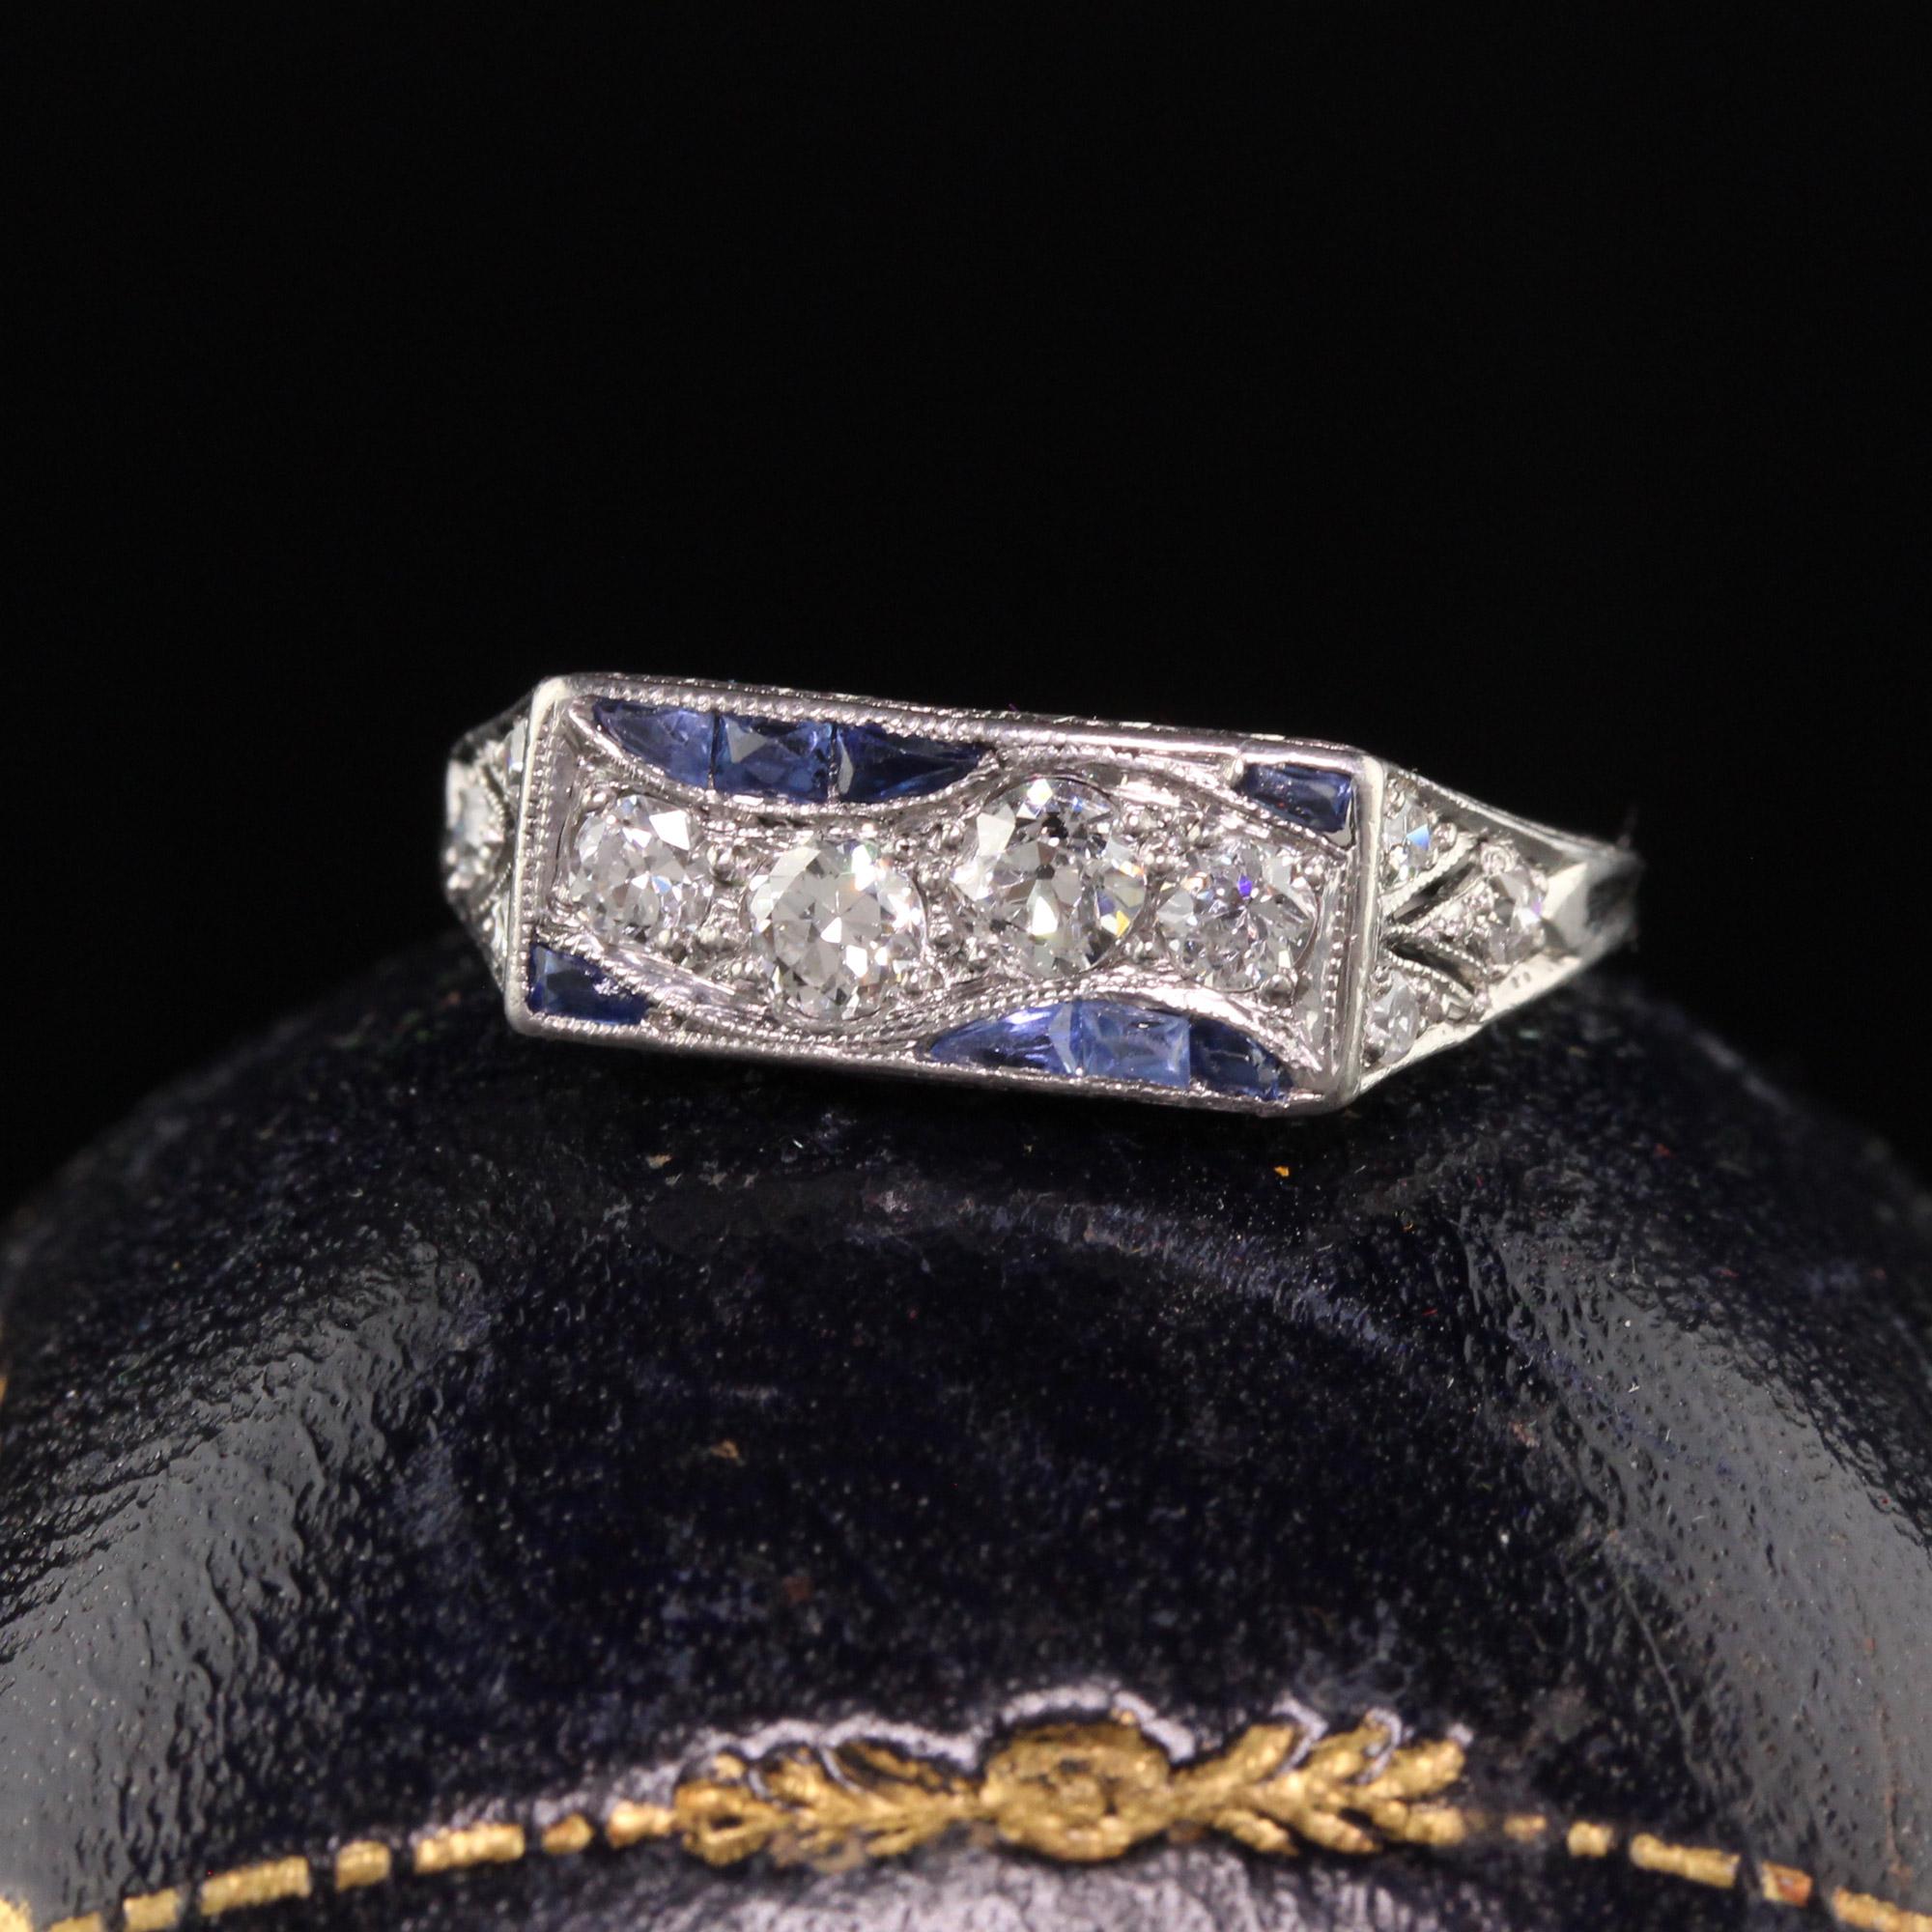 Beautiful Antique Art Deco Platinum Old European Diamond and Sapphire Engraved Ring. This gorgeous ring is crafted in platinum and has crisp engravings going around the ring. The ring is set with old european cut diamonds and french cut sapphires